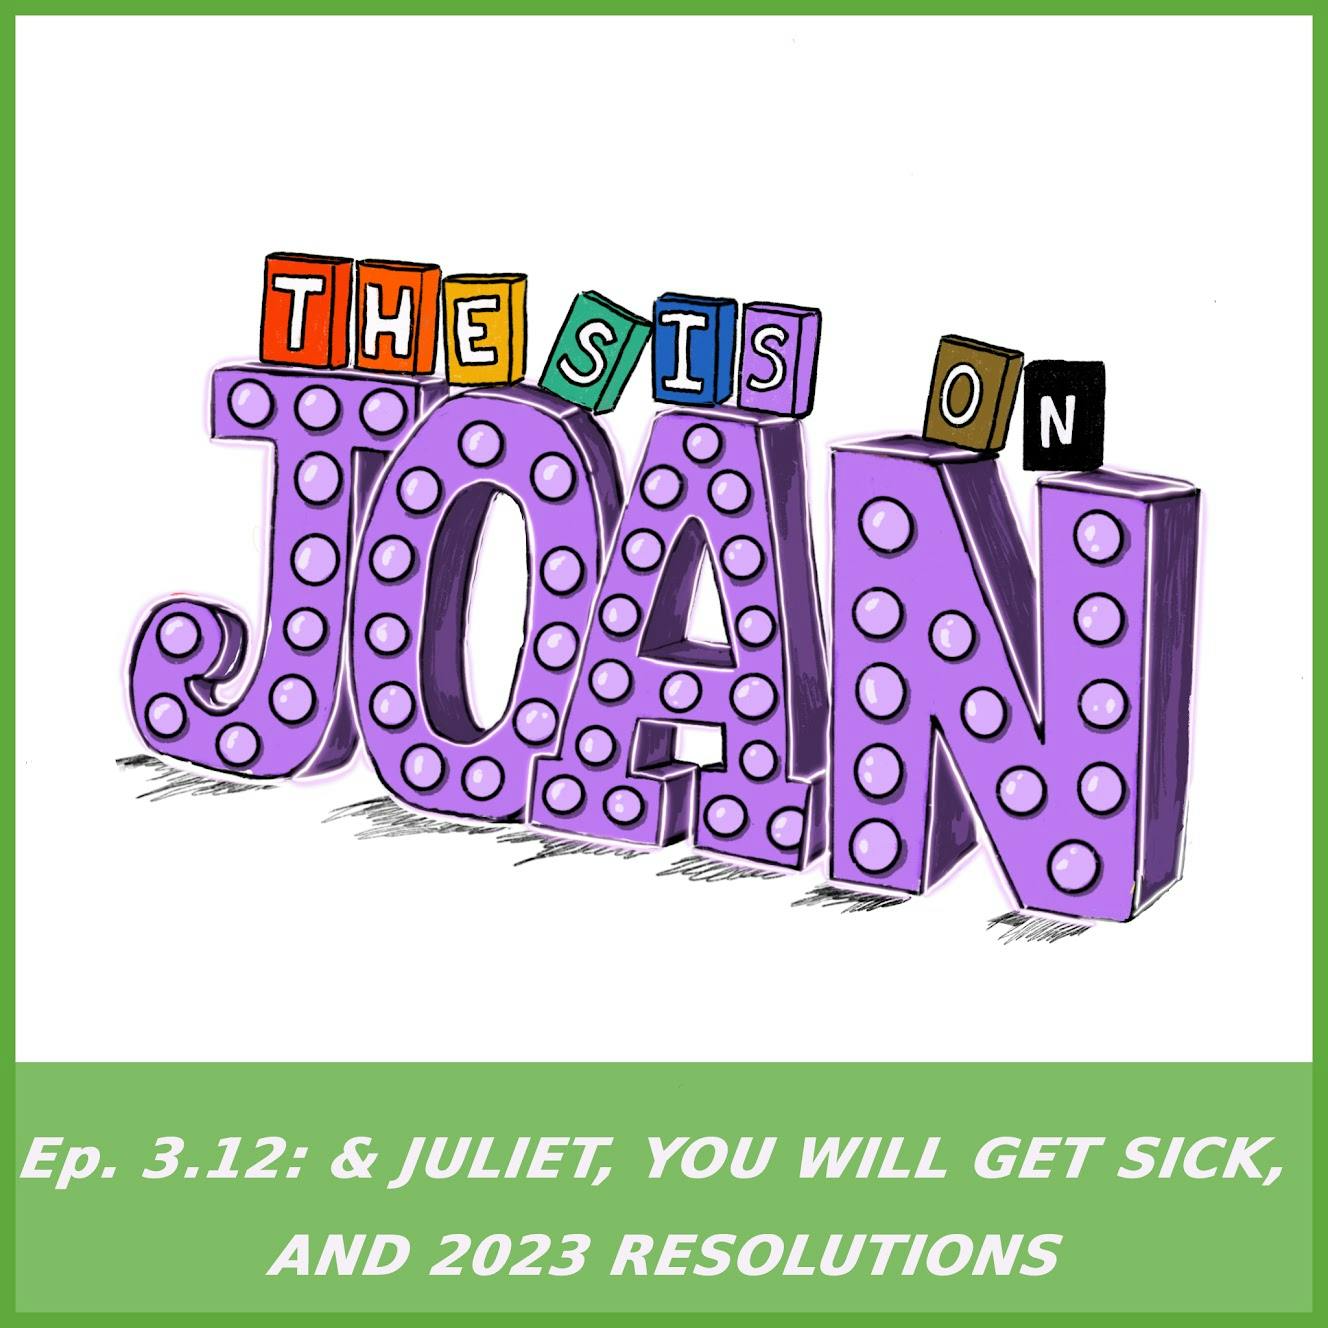 #3.12 & Juliet, You Will Get Sick and 2023 Resolutions